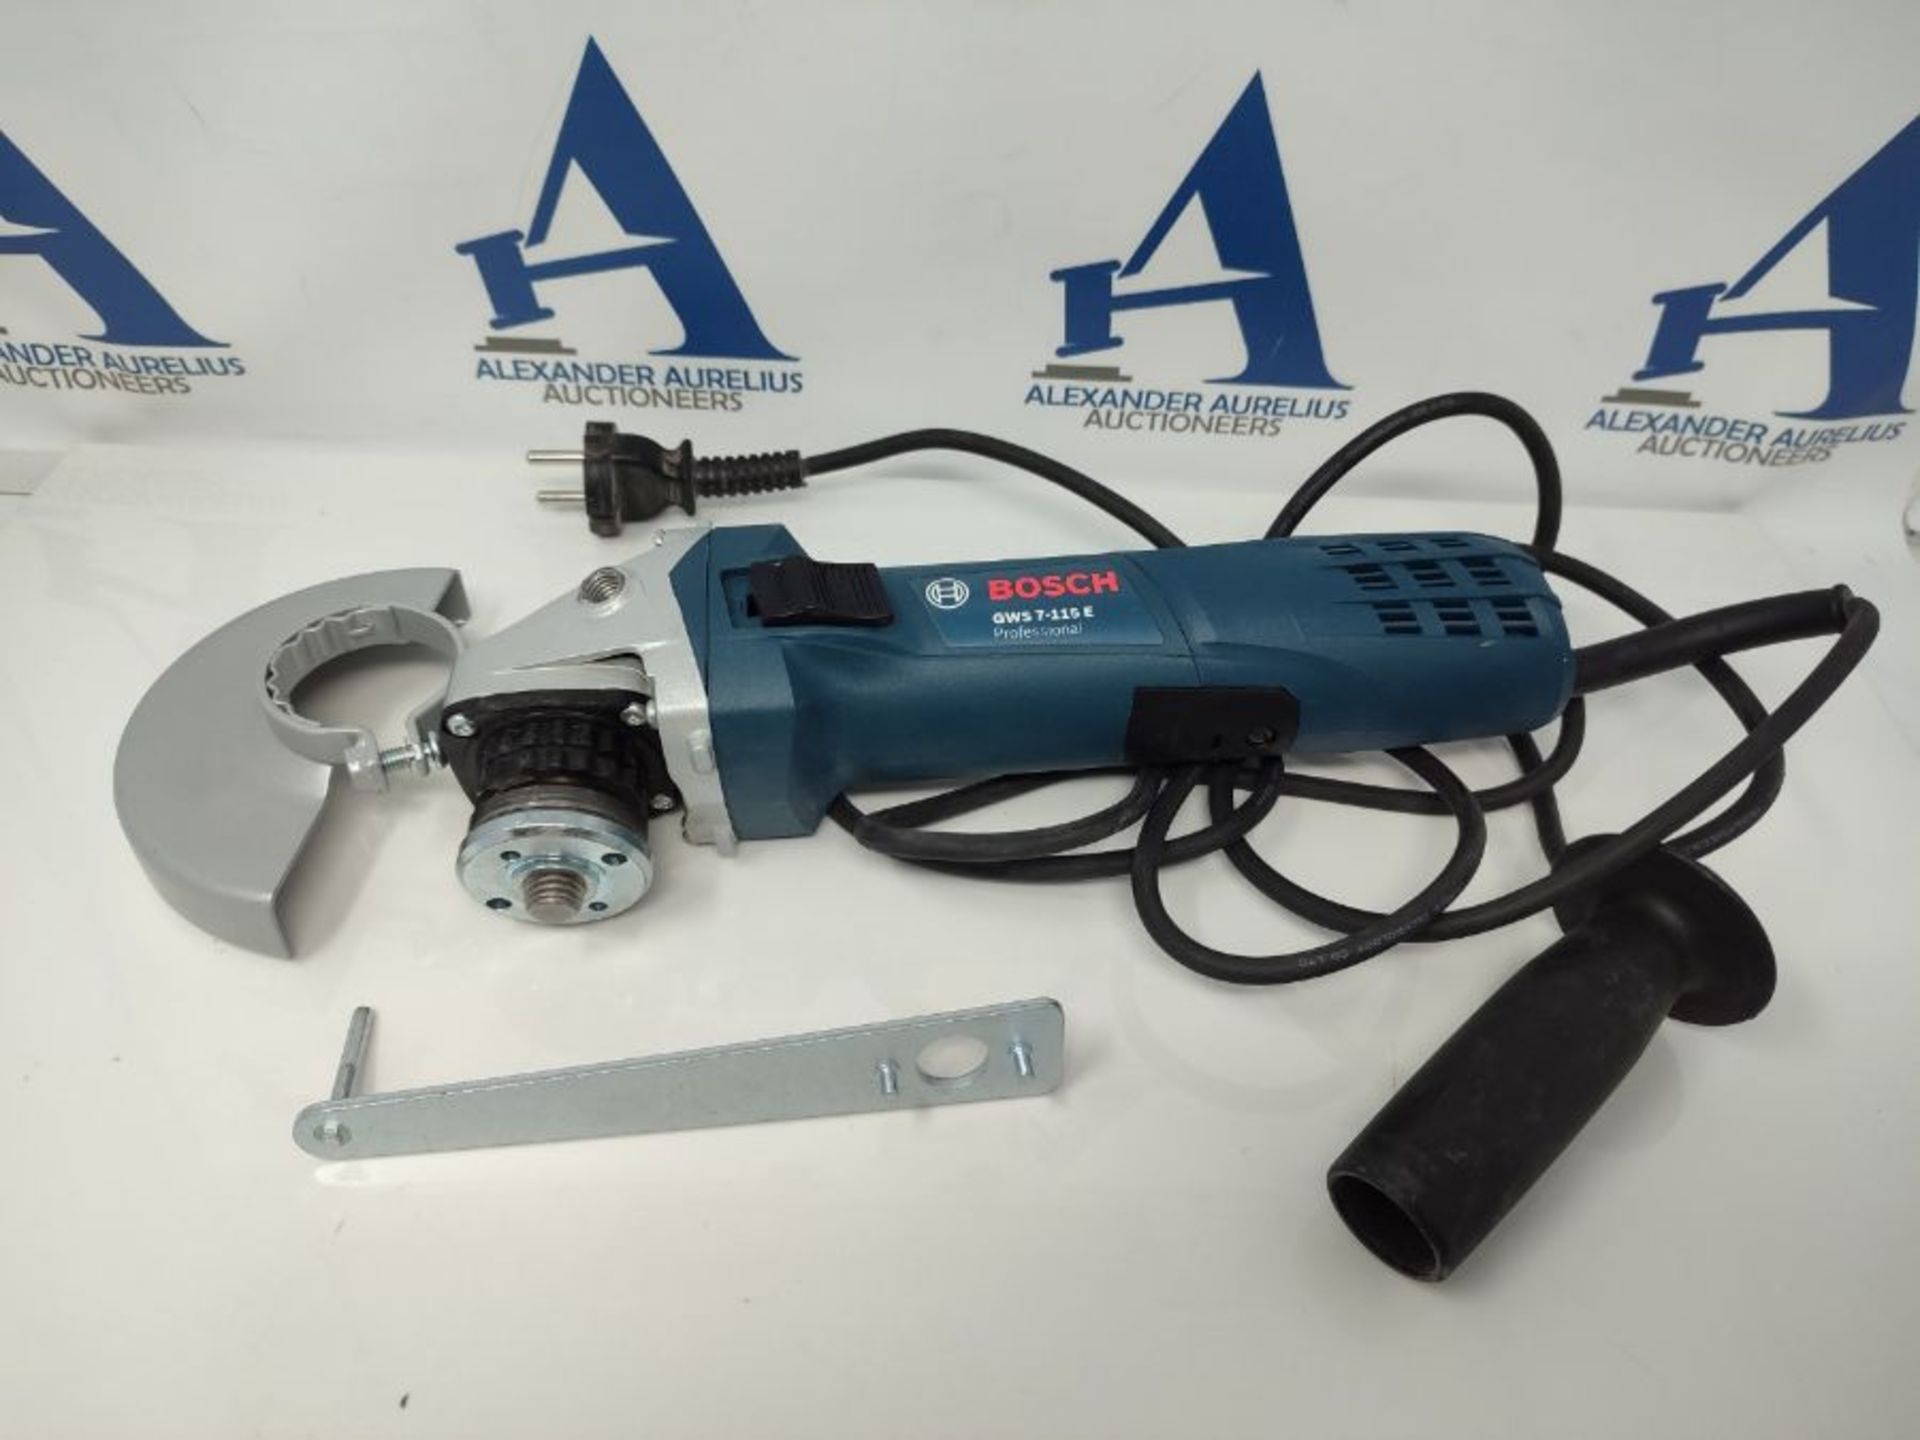 RRP £64.00 Bosch Professional GWS 7-115 E Angle Grinder (720 W, 2800-11000 RPM, Disk Diameter: 11 - Image 3 of 3